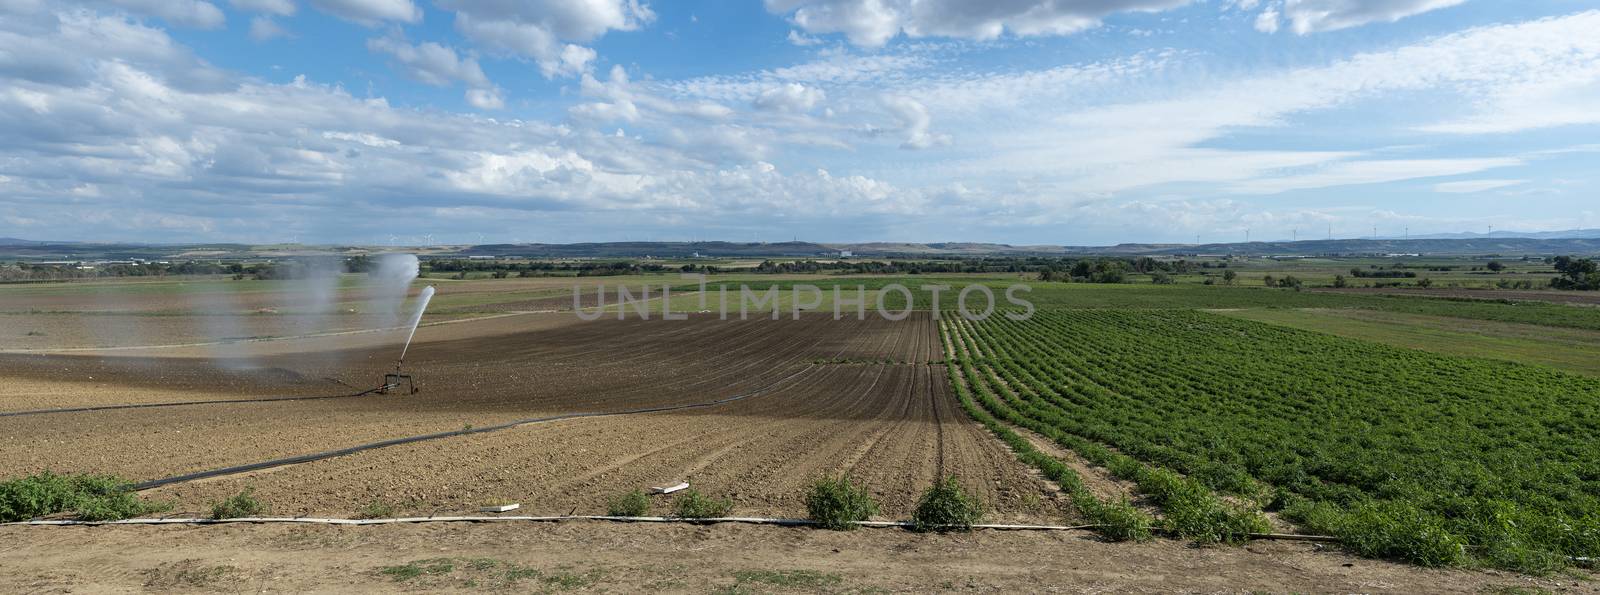 Watering green plants and plowed soil. Panoramic image. Newly planted agriculture land. Big industrial sprinkler irrigation.